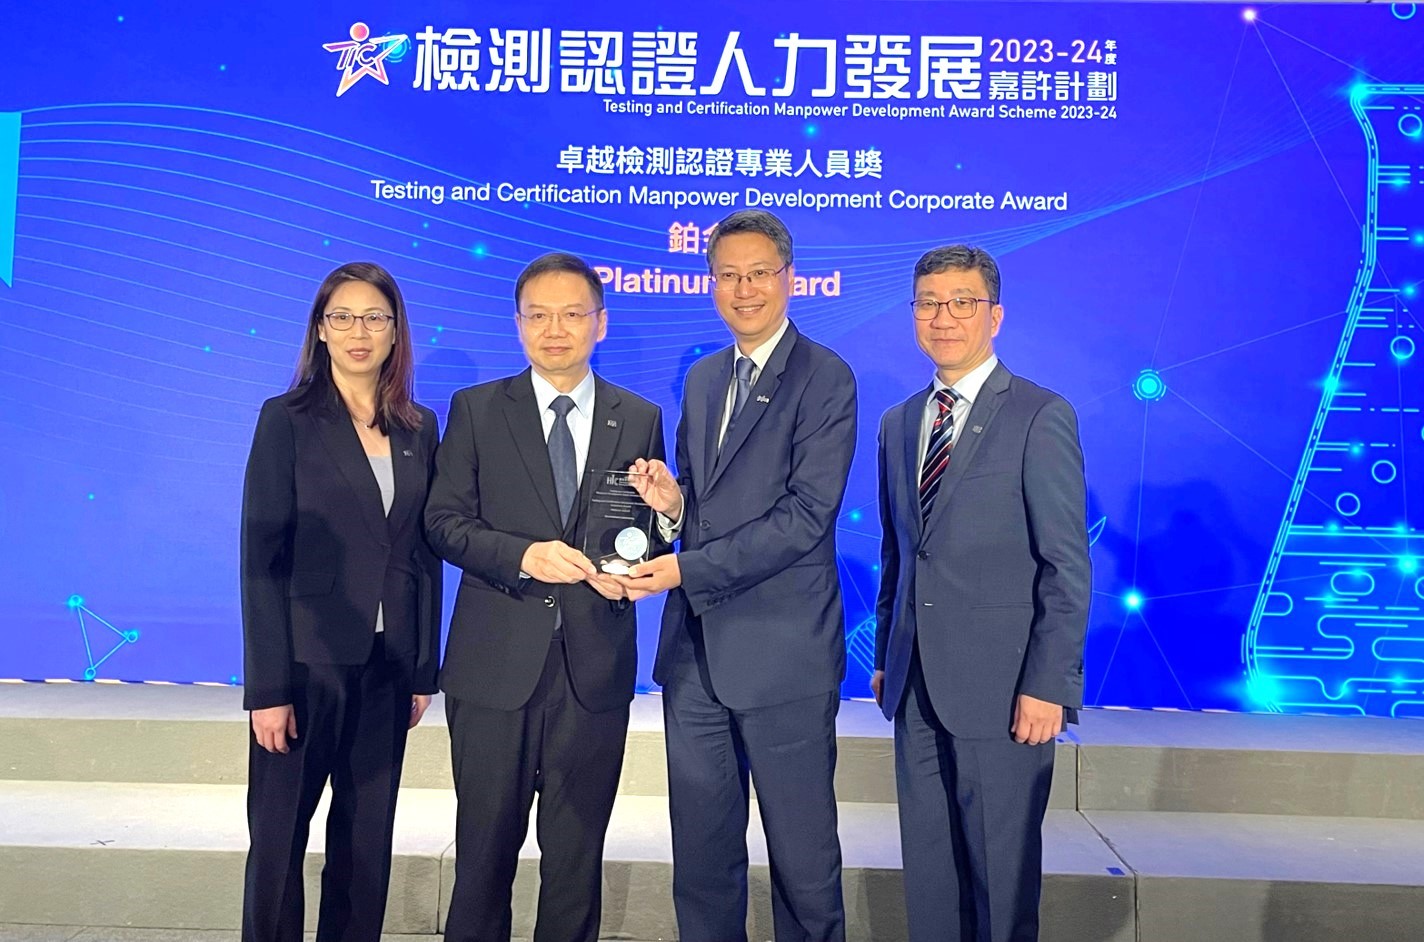 Photo 2: Photo shows the Permanent Secretary for Innovation, Technology and Industry, Mr Eddie MAK (second right), presenting the Testing and Certification Manpower Development Corporate Award (Platinum Award) to the Government Chemist, Dr LEE Wai-on (second left).